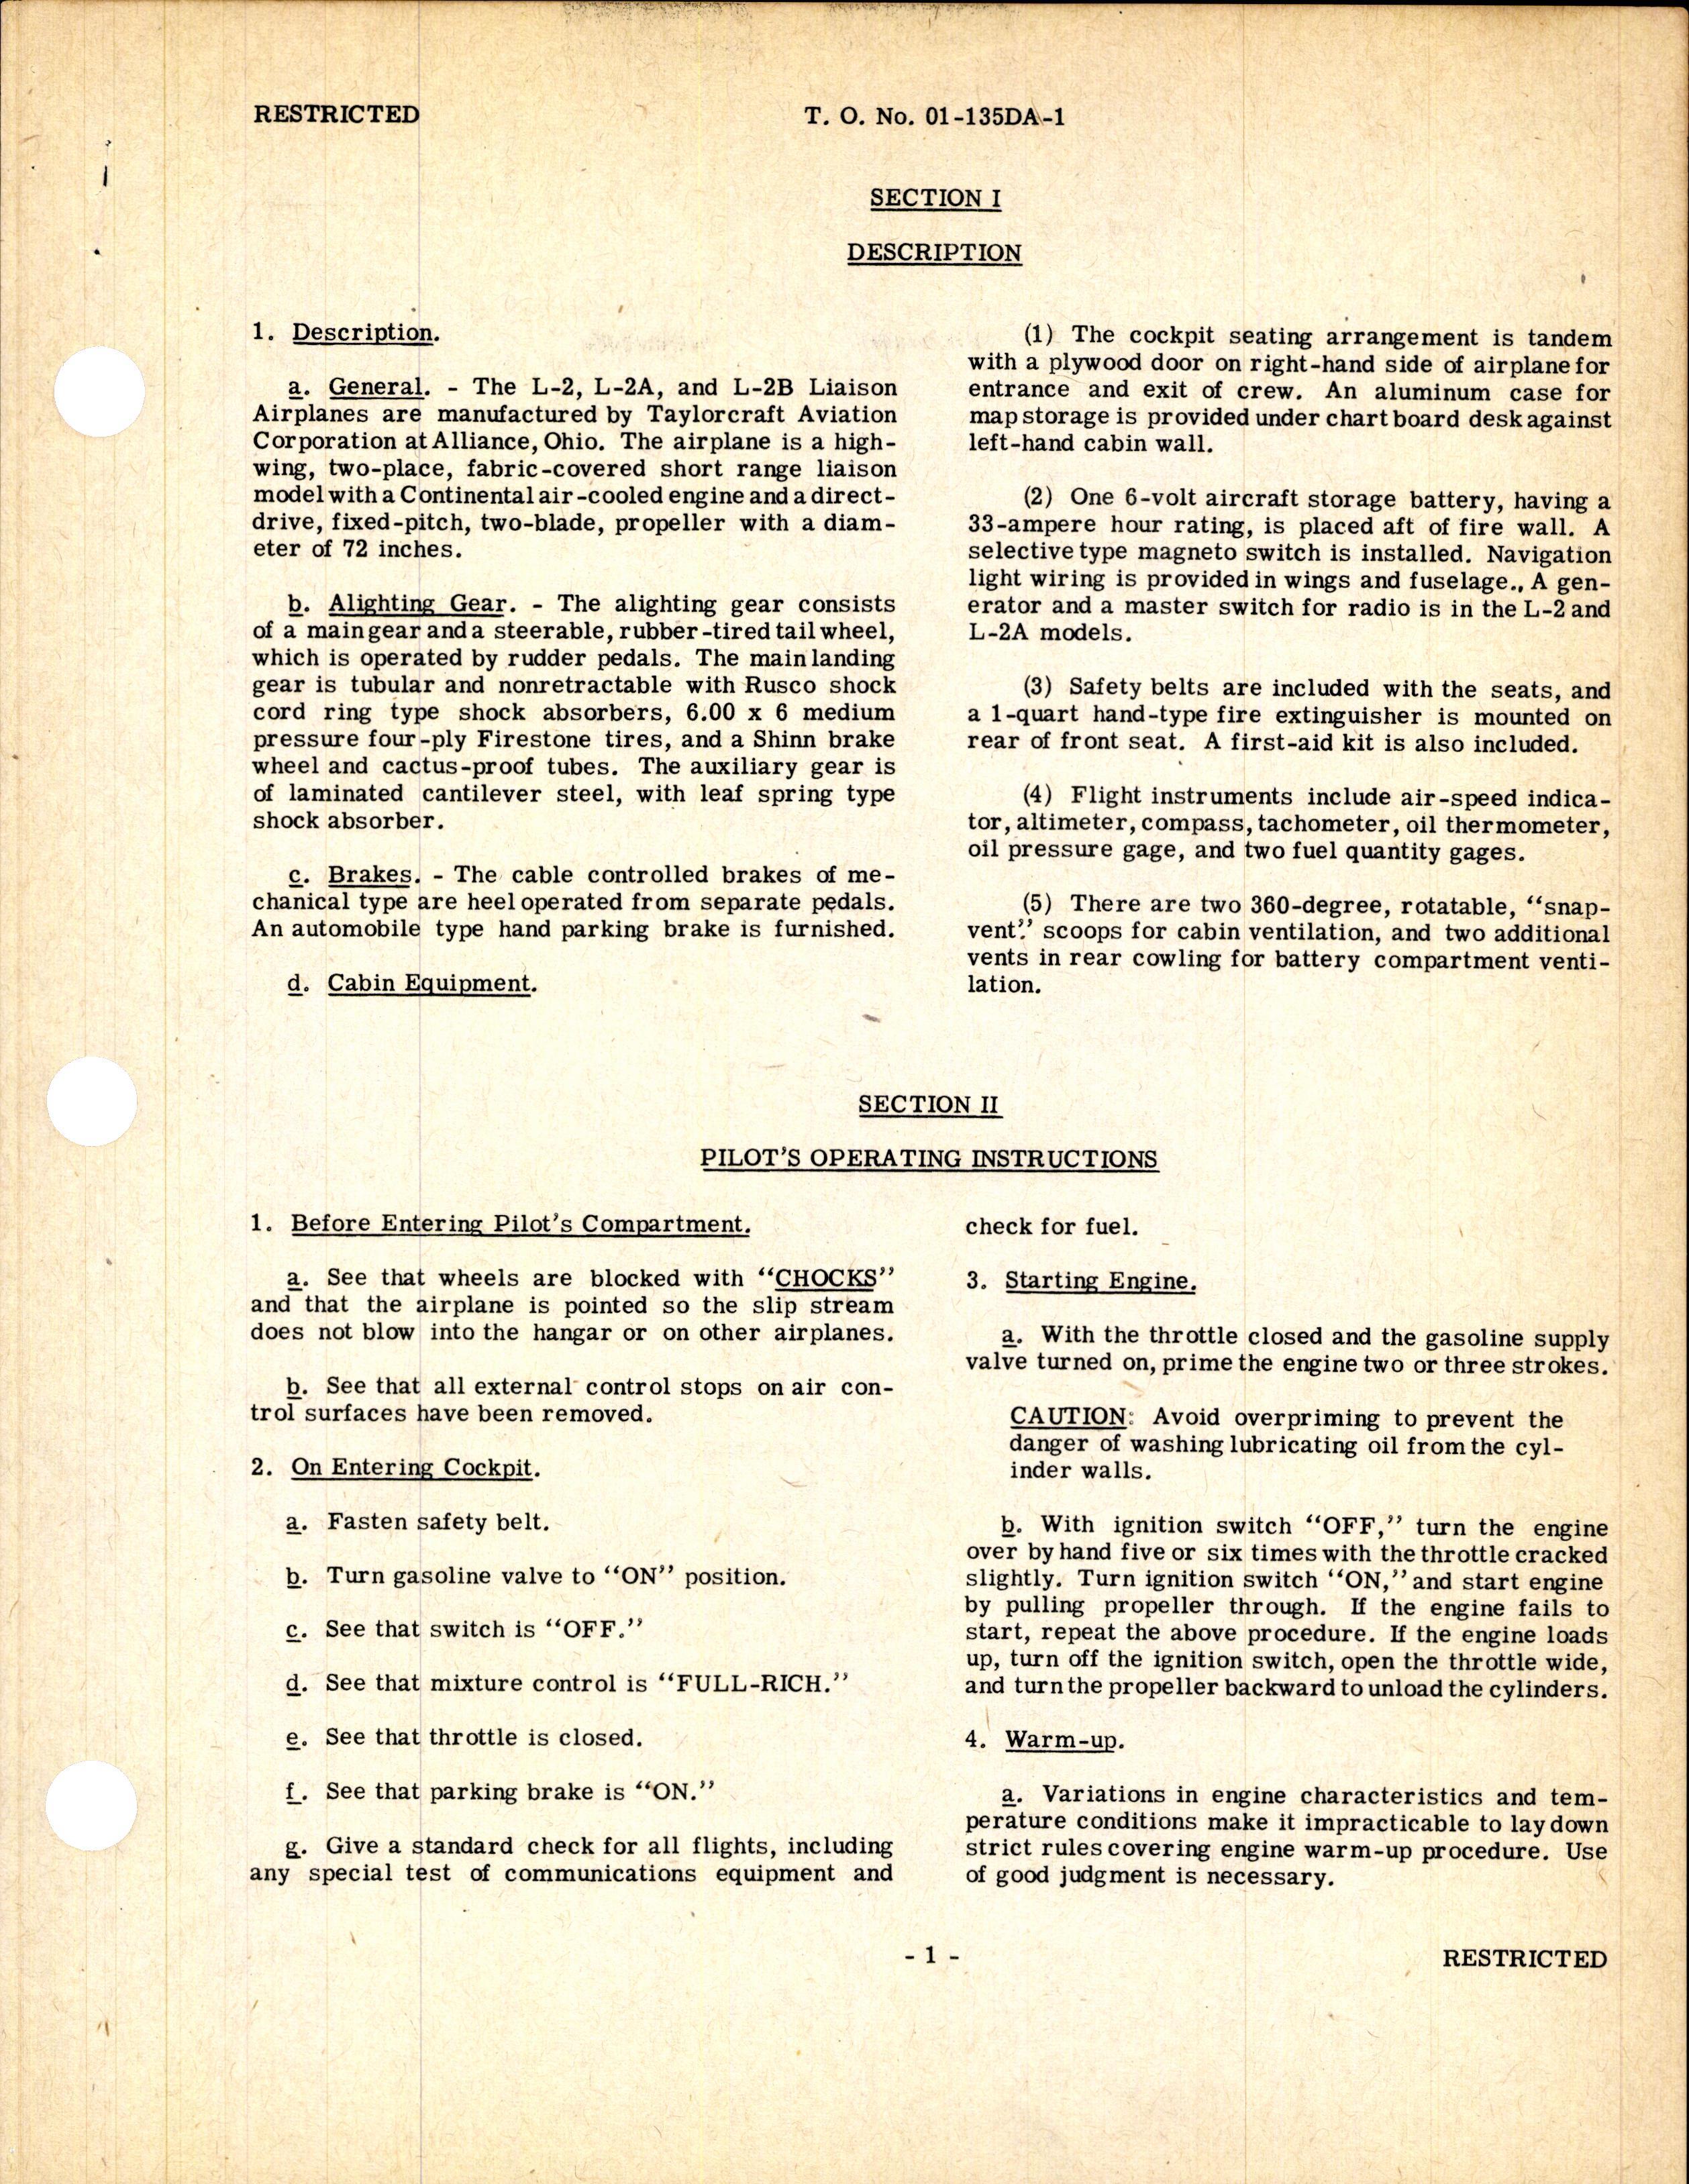 Sample page 5 from AirCorps Library document: Pilot's Flight Operating Instructions for L-2, L-2A & L-2B Airplanes